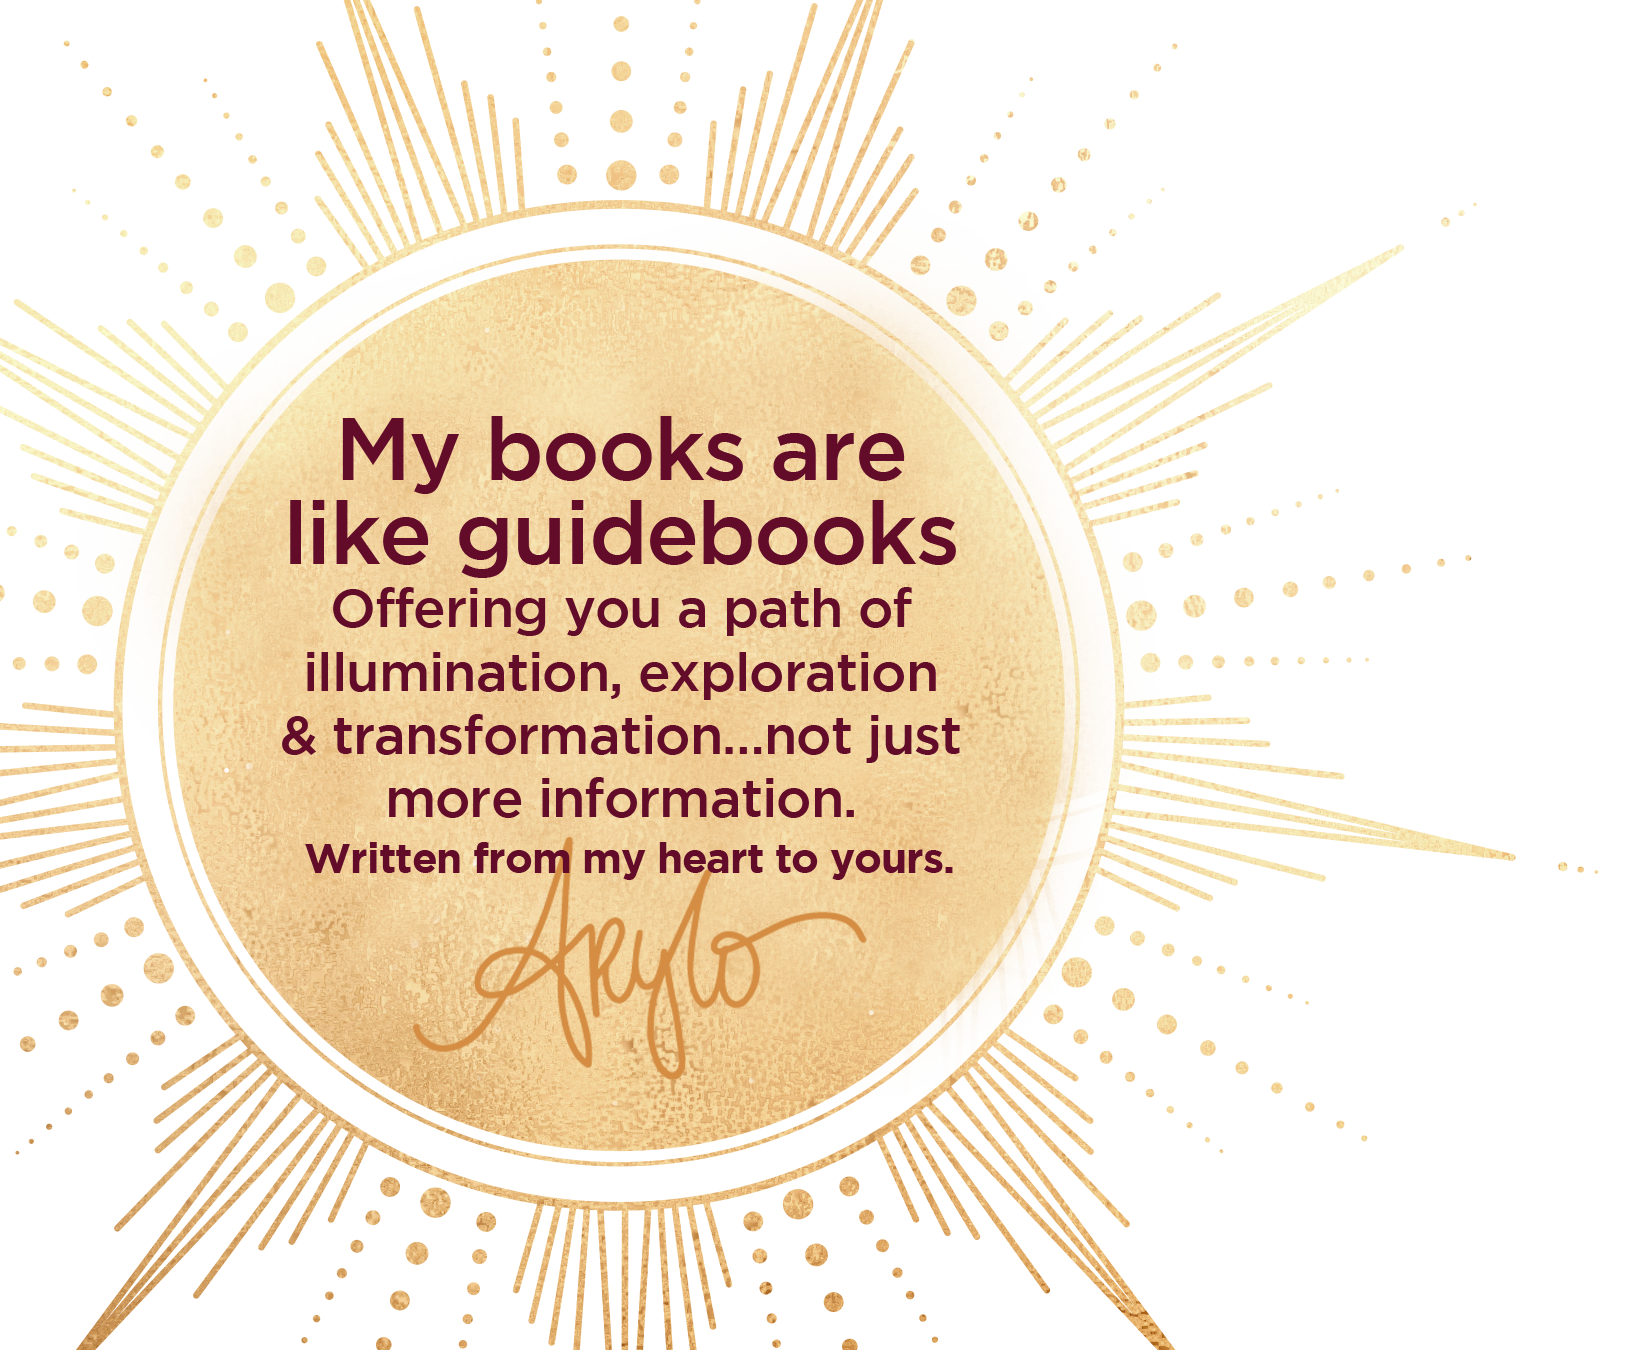 My books are like guidebooks. Offering you a path of illumination, exploration & transformation... not just more information. Written from my heart to yours. Christine Arylo